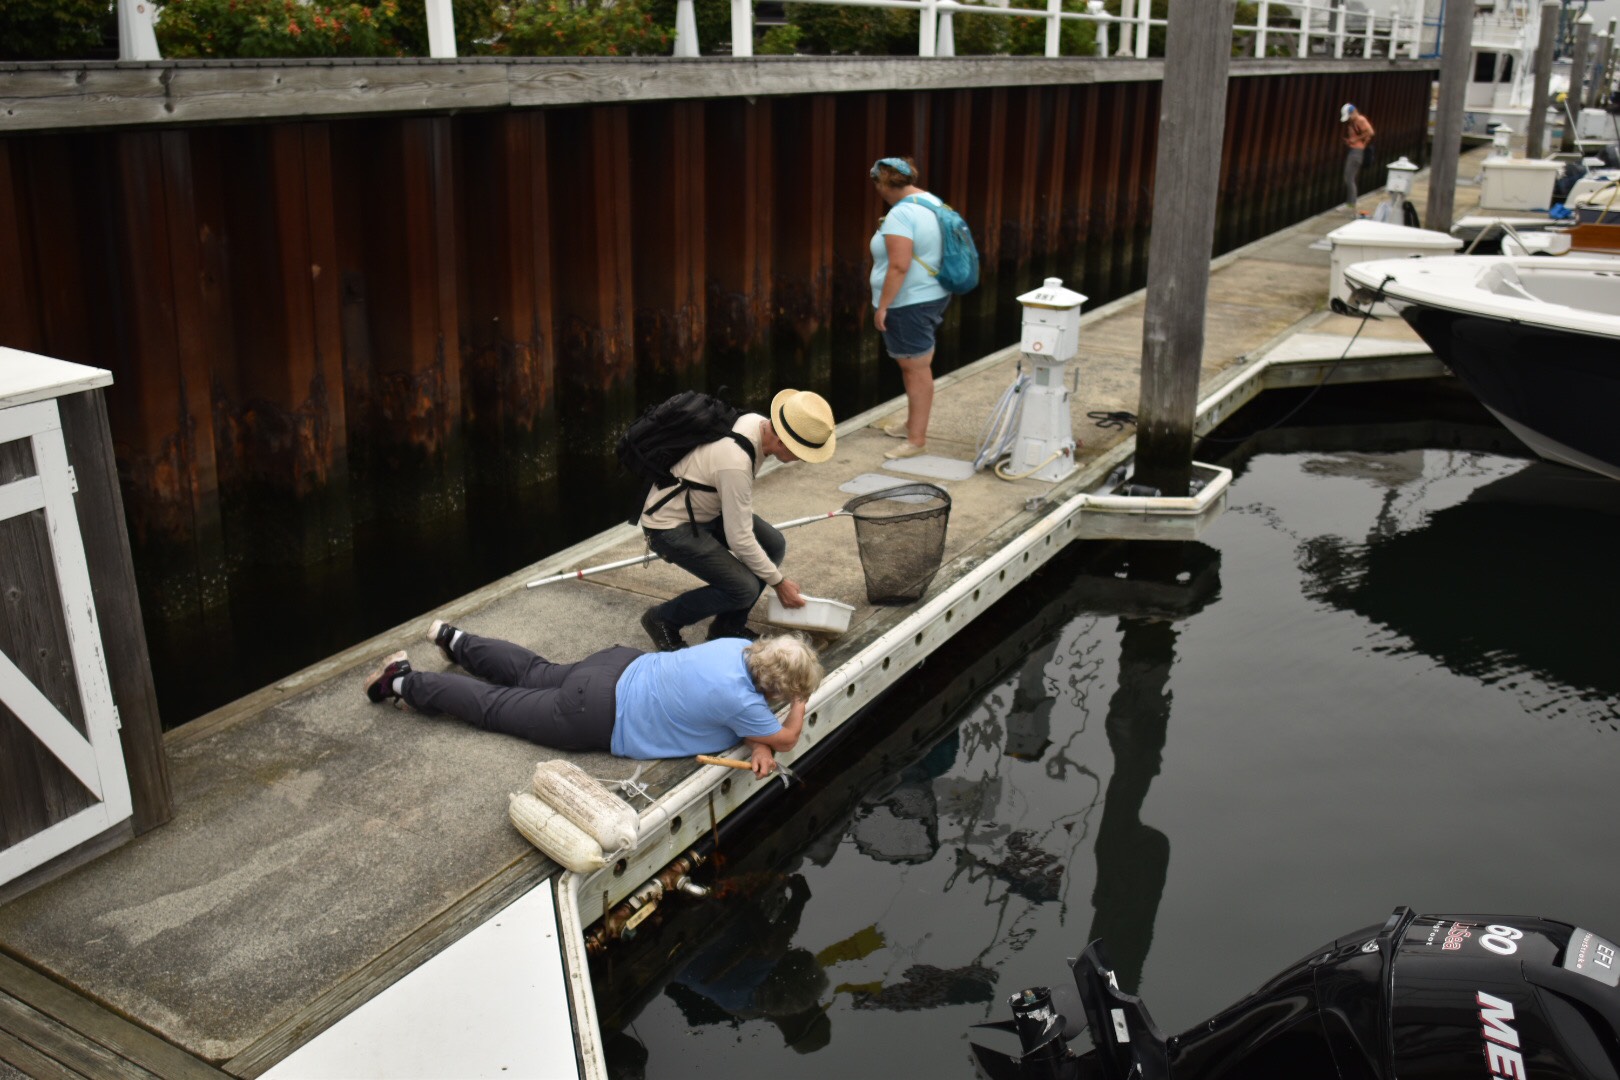 Volunteers take samples over the dock's edge at Point Judith marina to check for new invasive species as part of the New England Rapid Assessment 